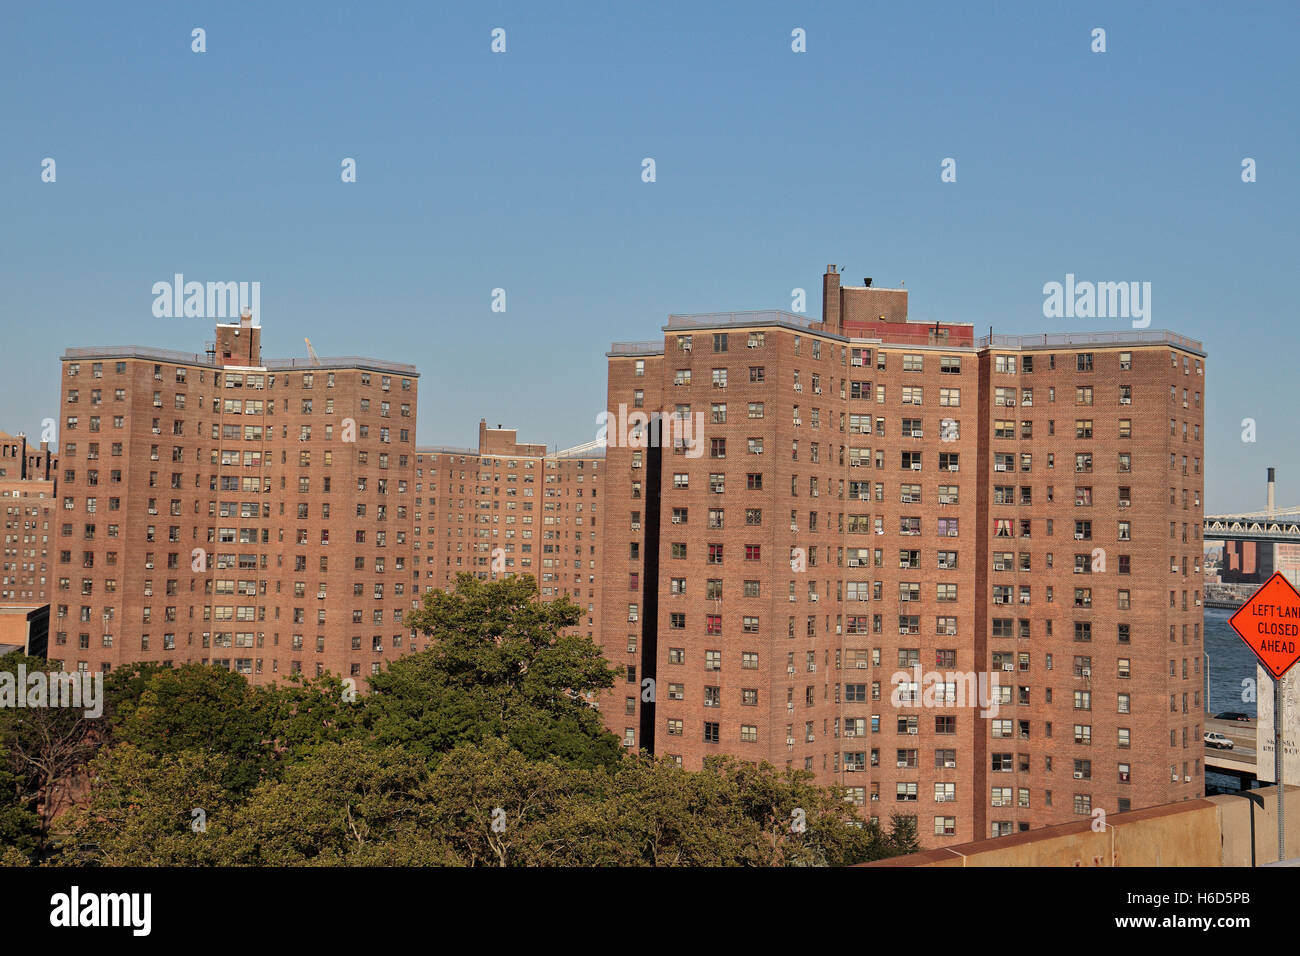 Part of the Alfred E. Smith House public housing development, Lower East Side of Manhattan, New York, United States. Stock Photo